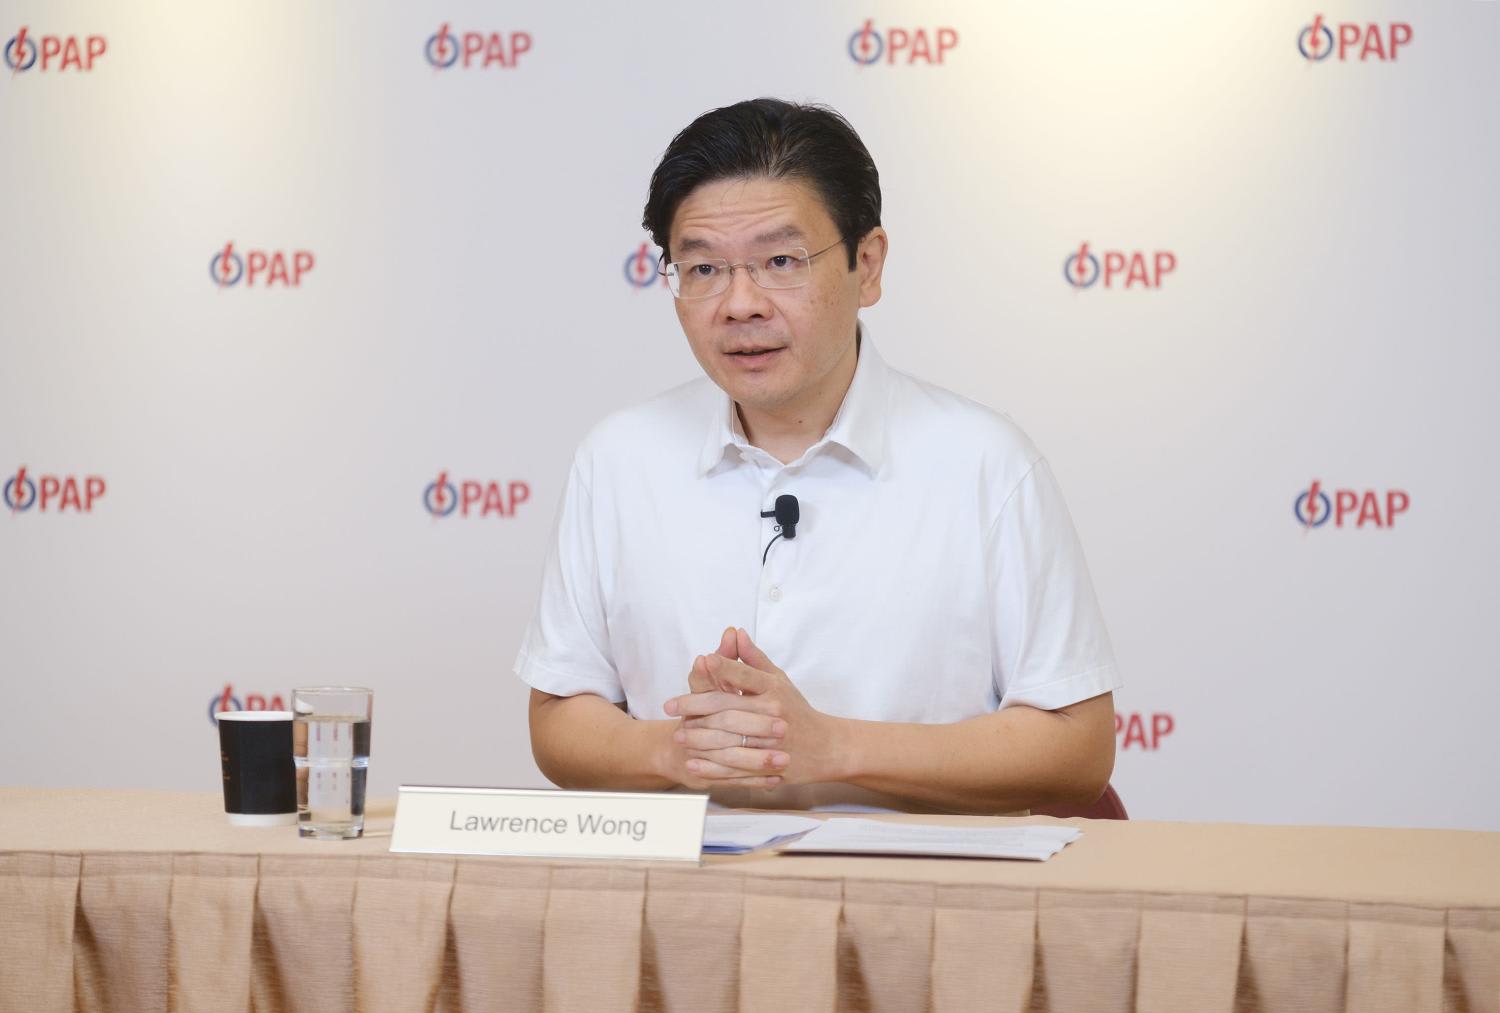 Mr Lawrence Wong was on April 15, 2022, named by Cabinet ministers as the leader of the fourth generation of Singapore's political leadership.